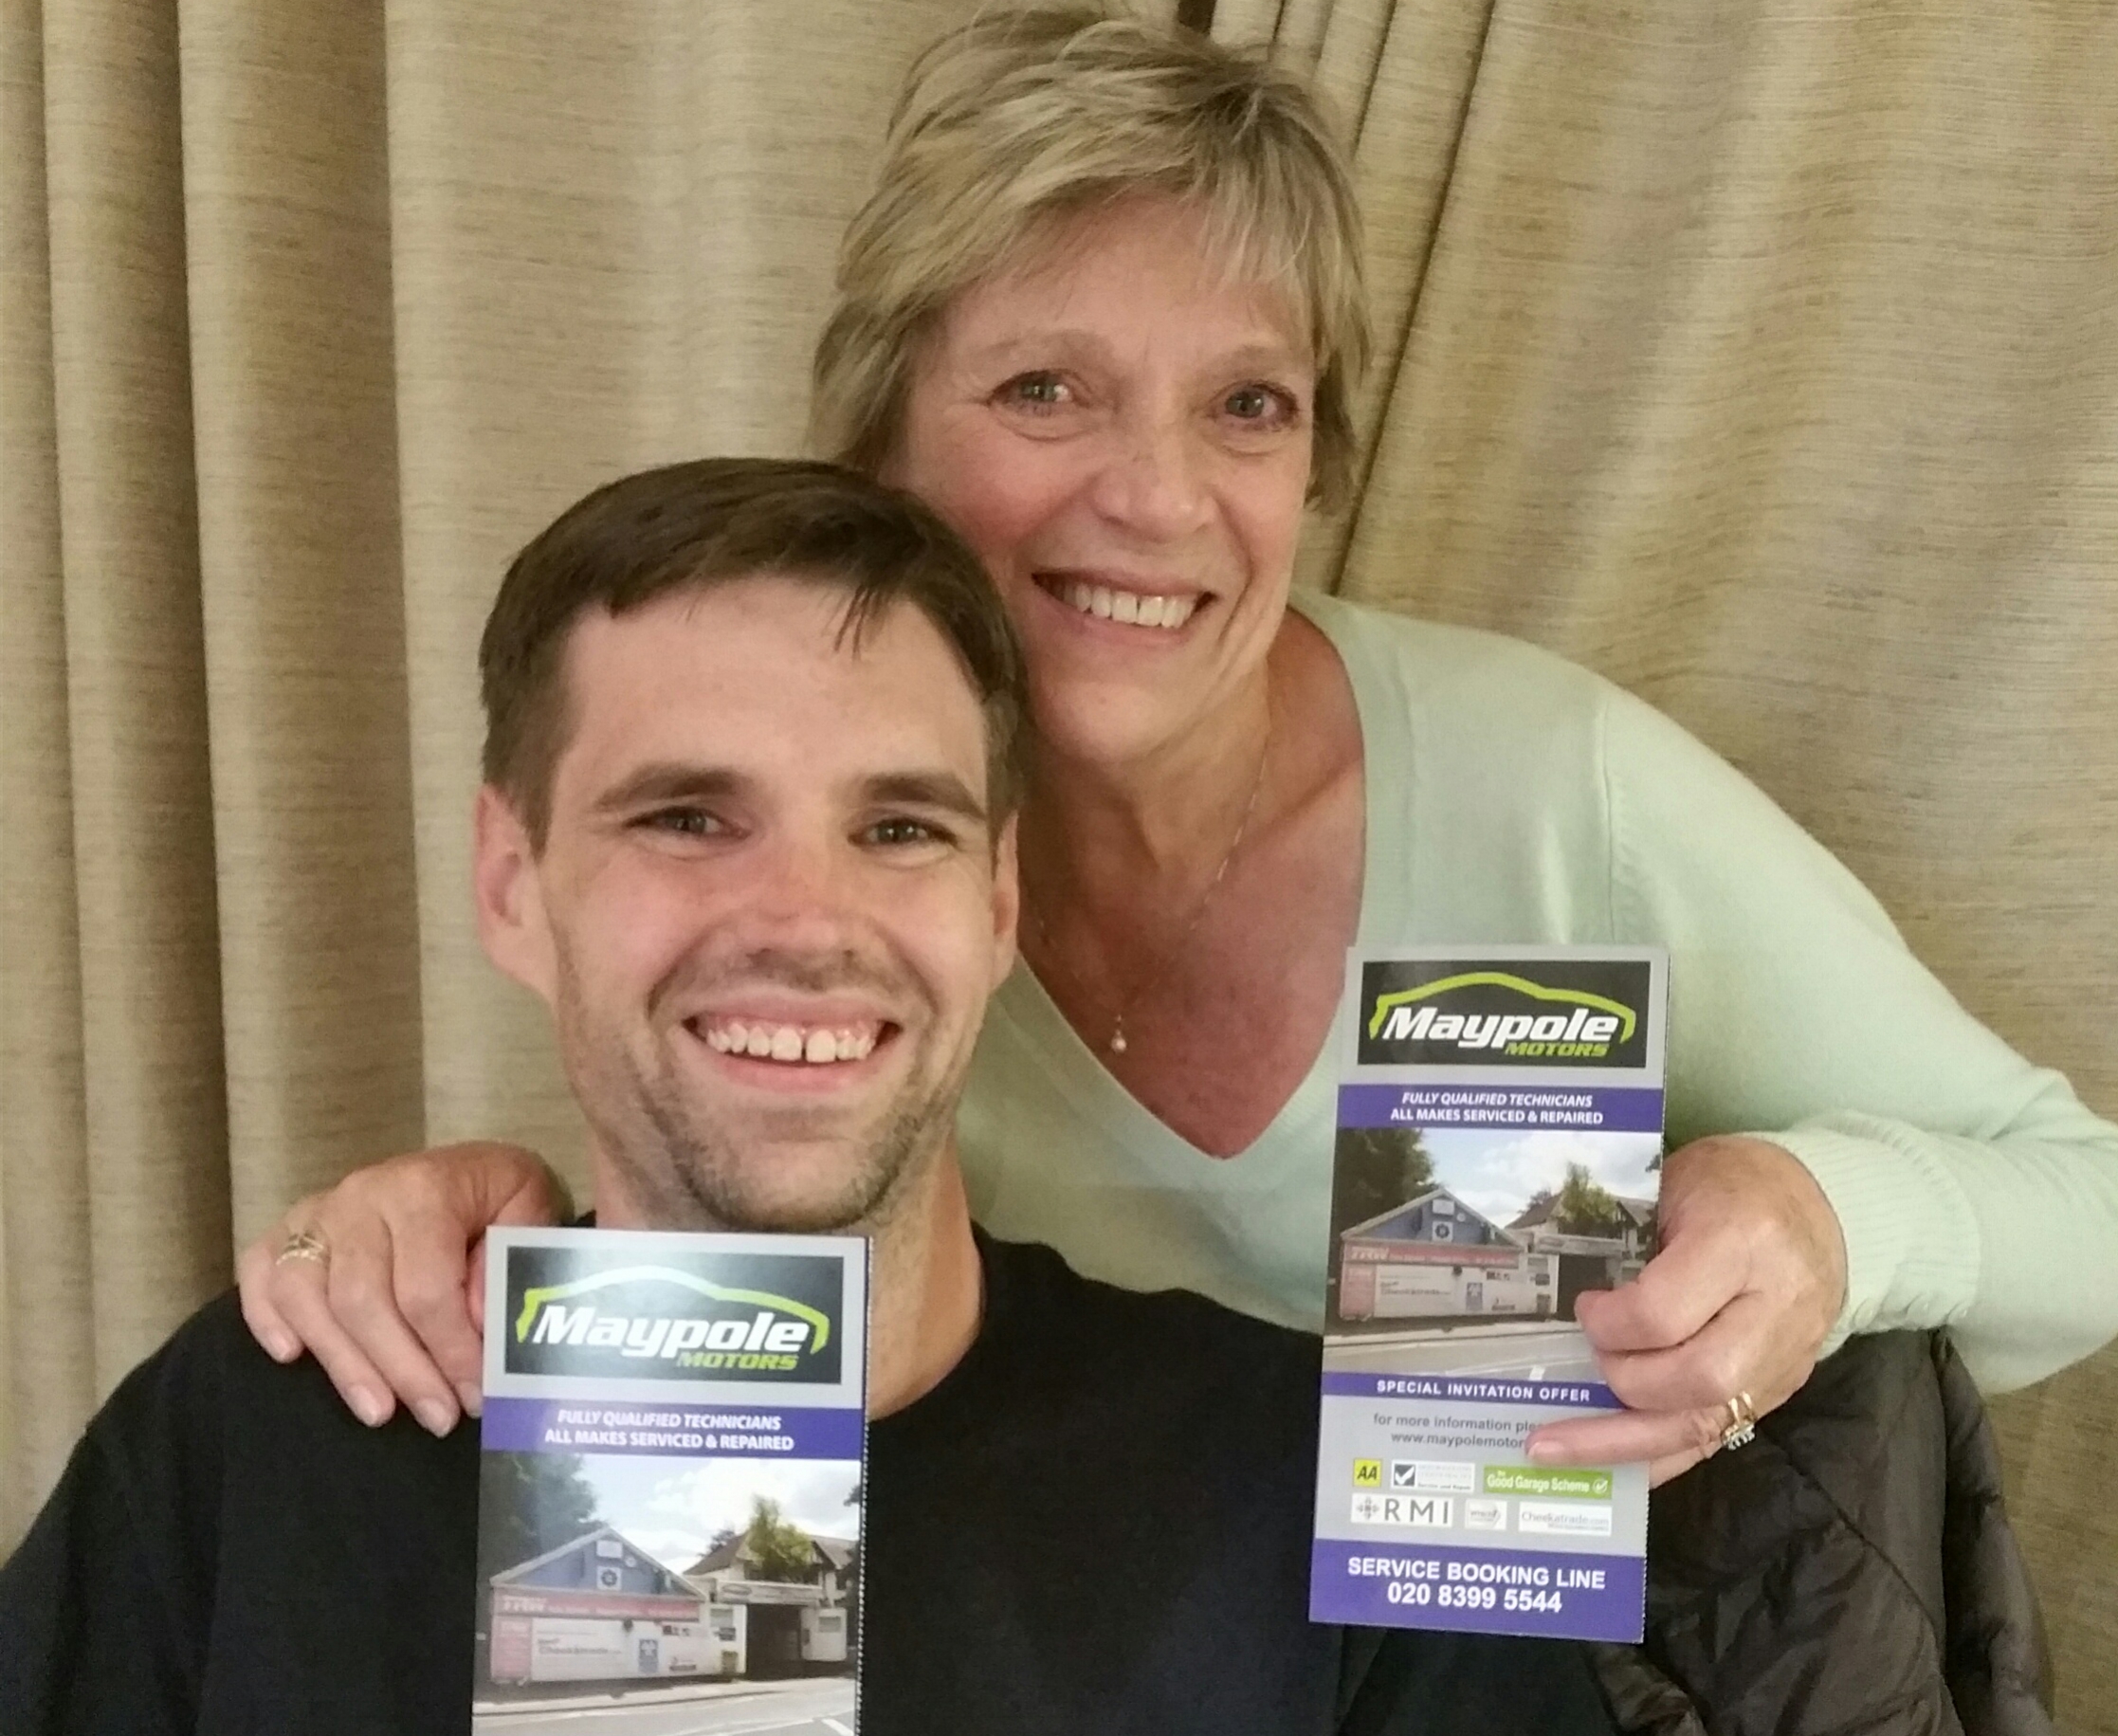 Mrs Johnstone from Surbiton, bought our EasyCarCare Promotion for her son and herself, for their local Partner Garage in Surbiton